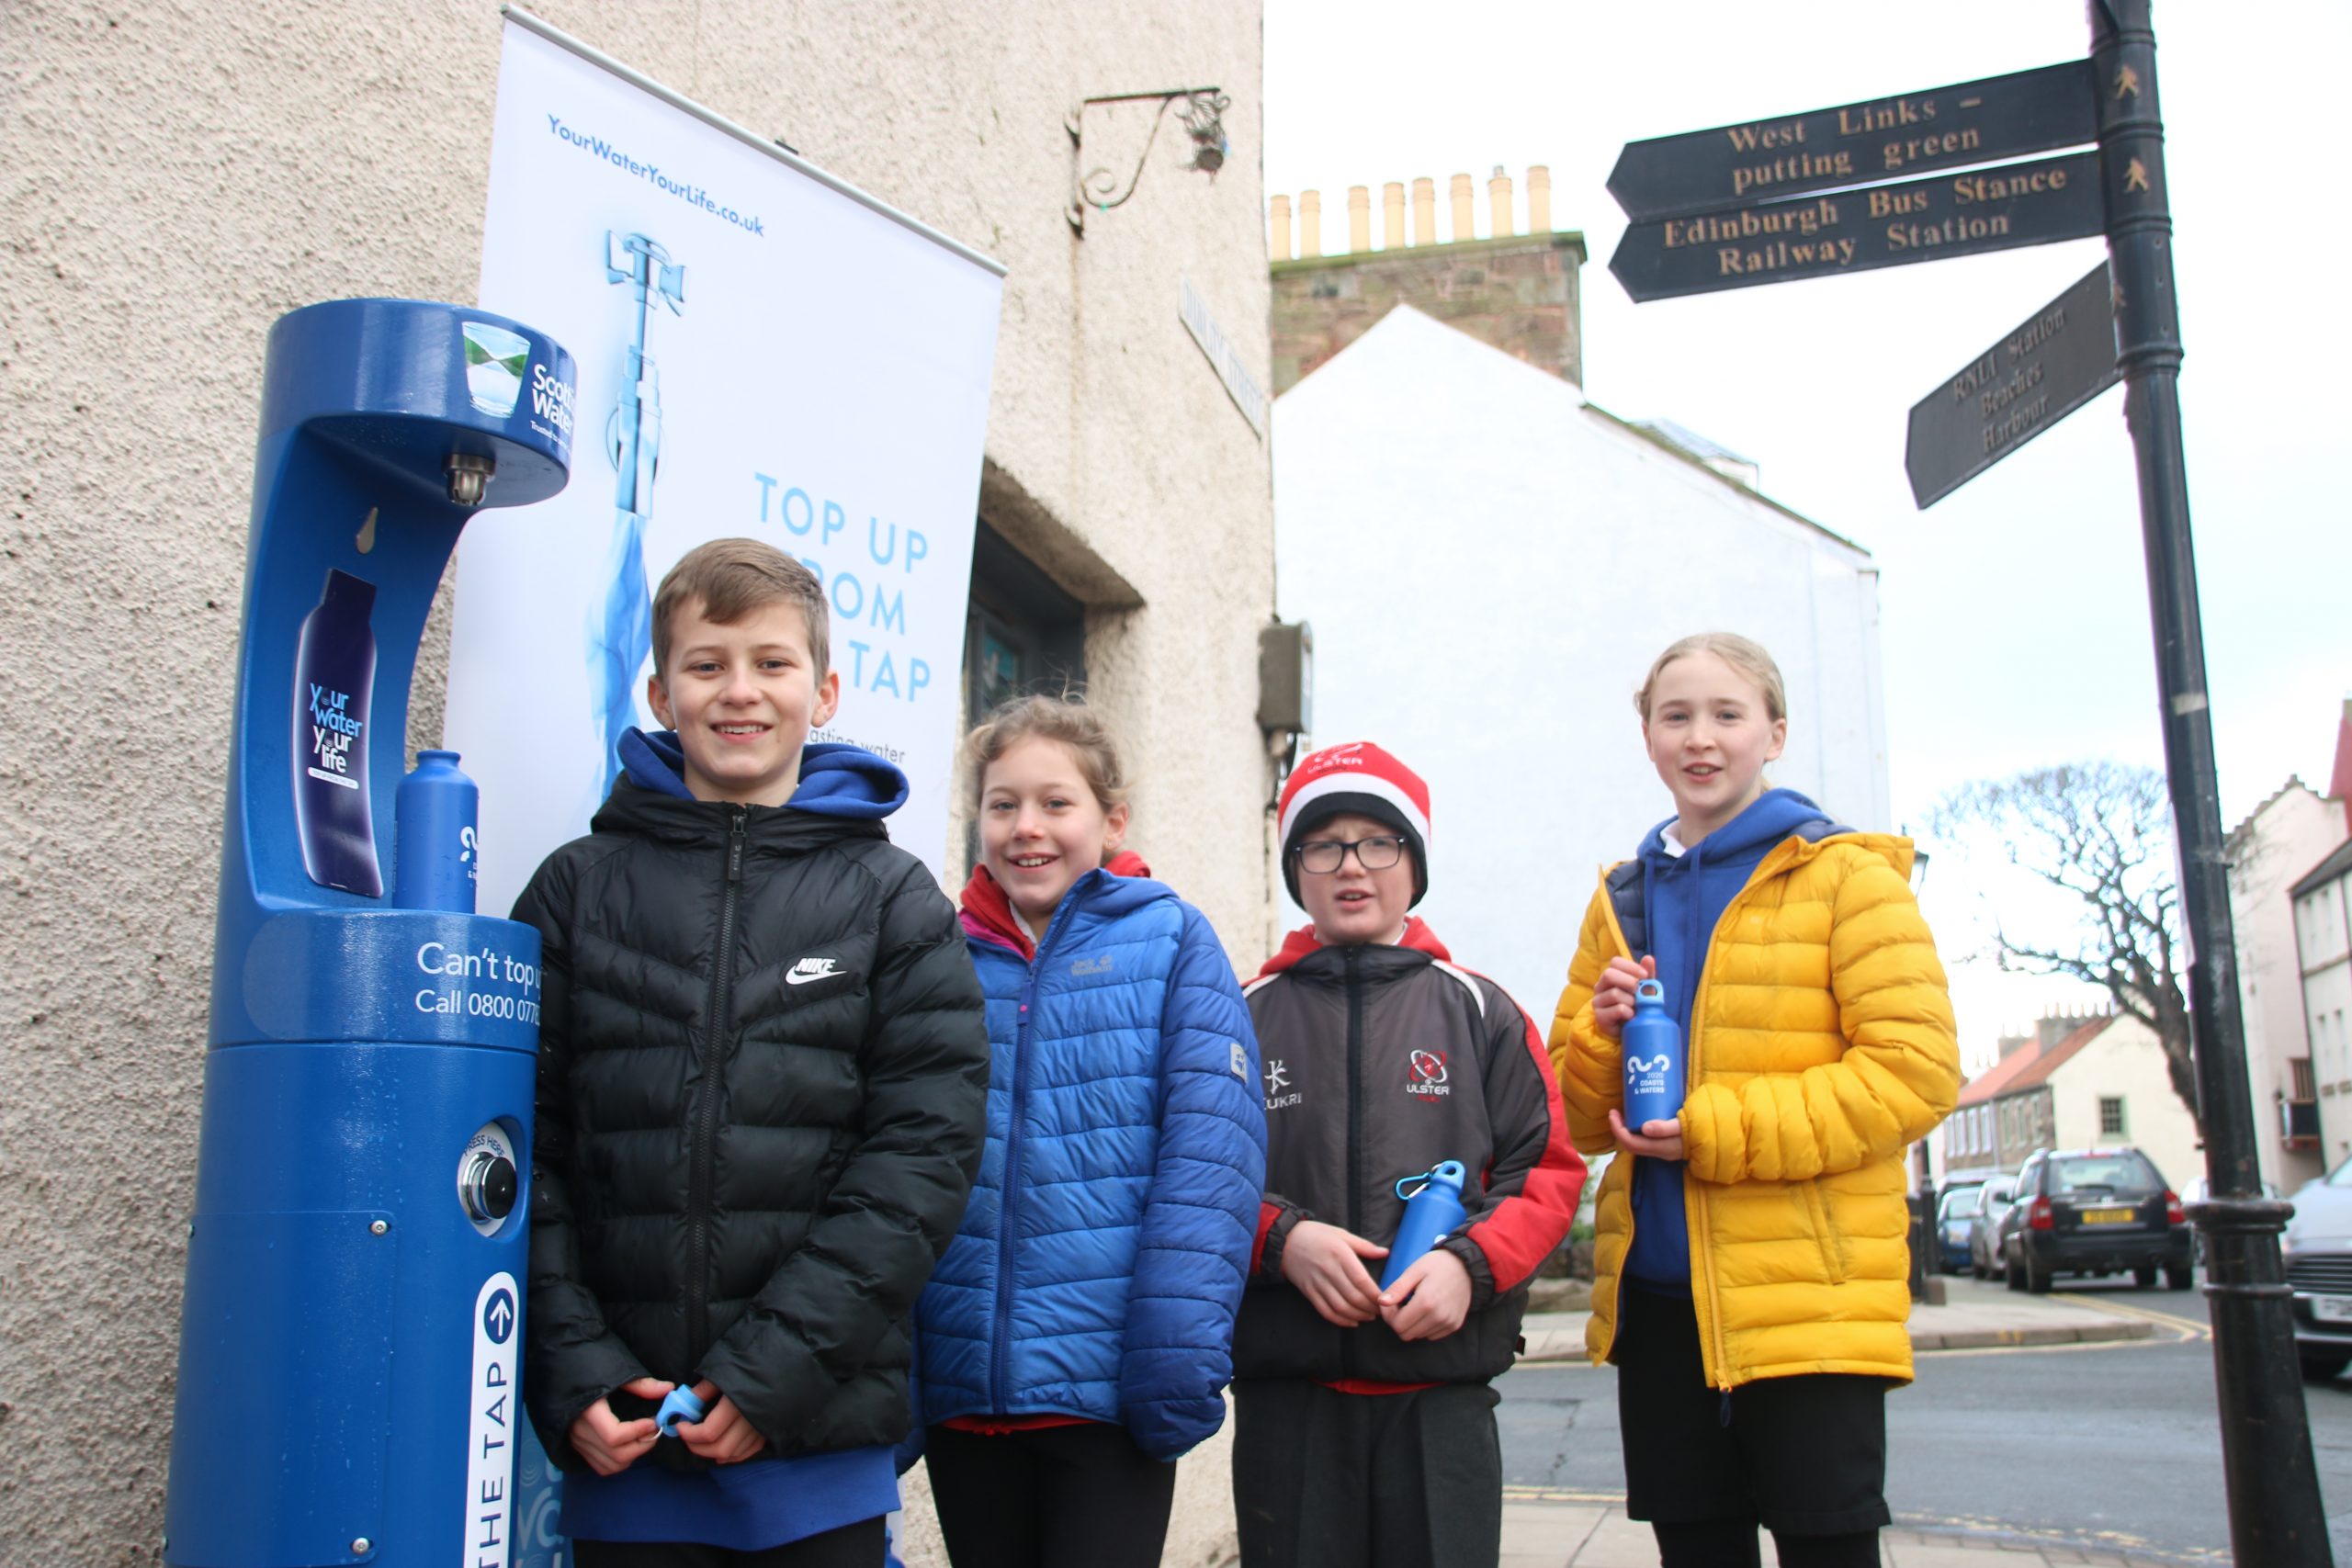 EAST LOTHIAN’S FIRST TOP UP TAP LAUNCHED